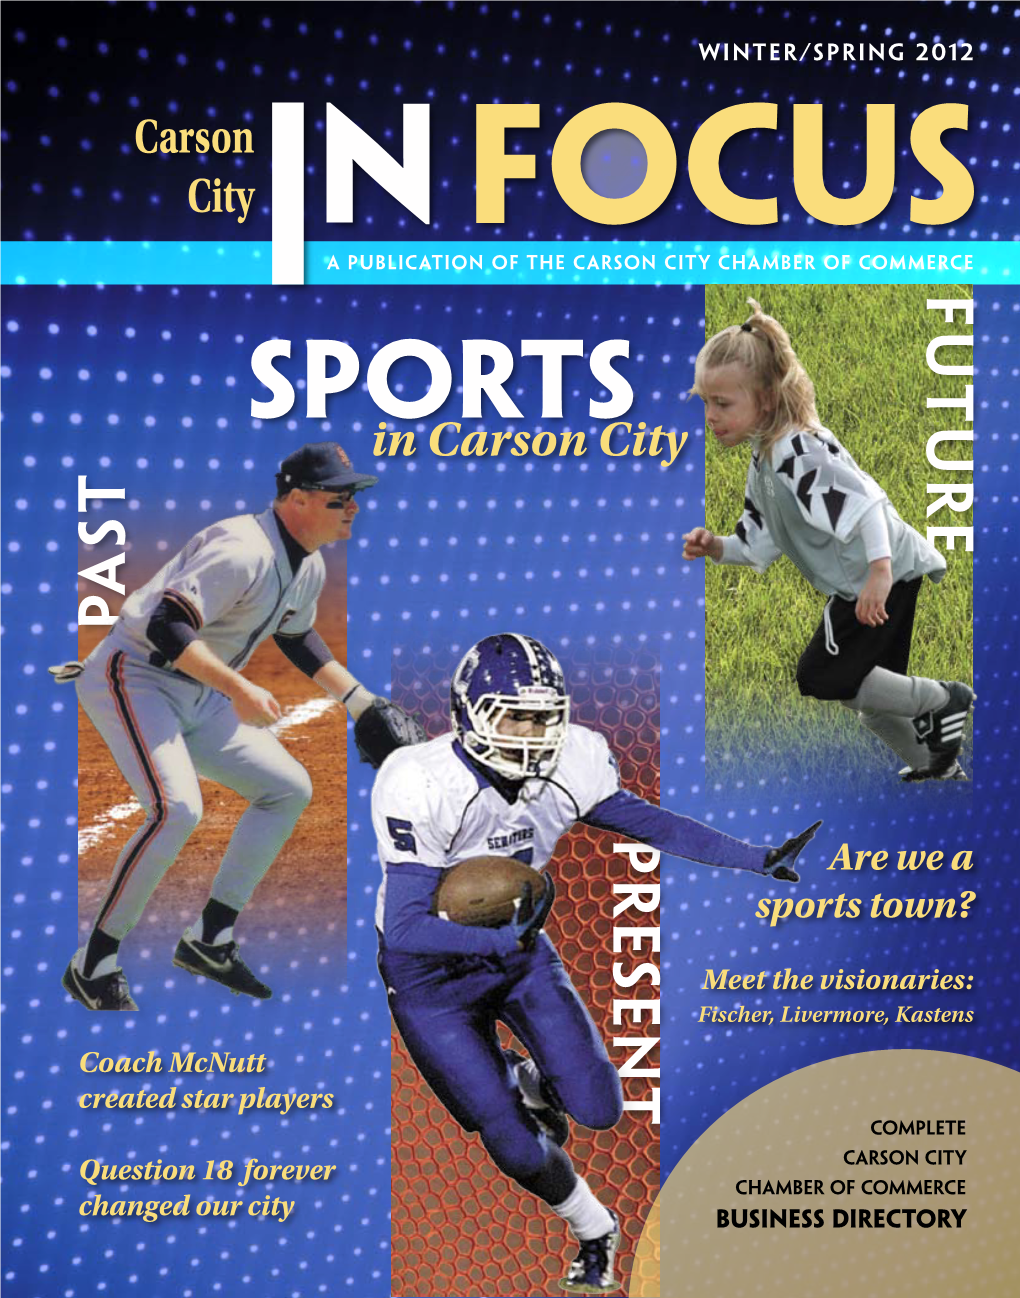 Carson City N Focus a Publication of the Carson City Chamber of Commerce Future Sports in Carson City Past Present Are We a Sports Town?